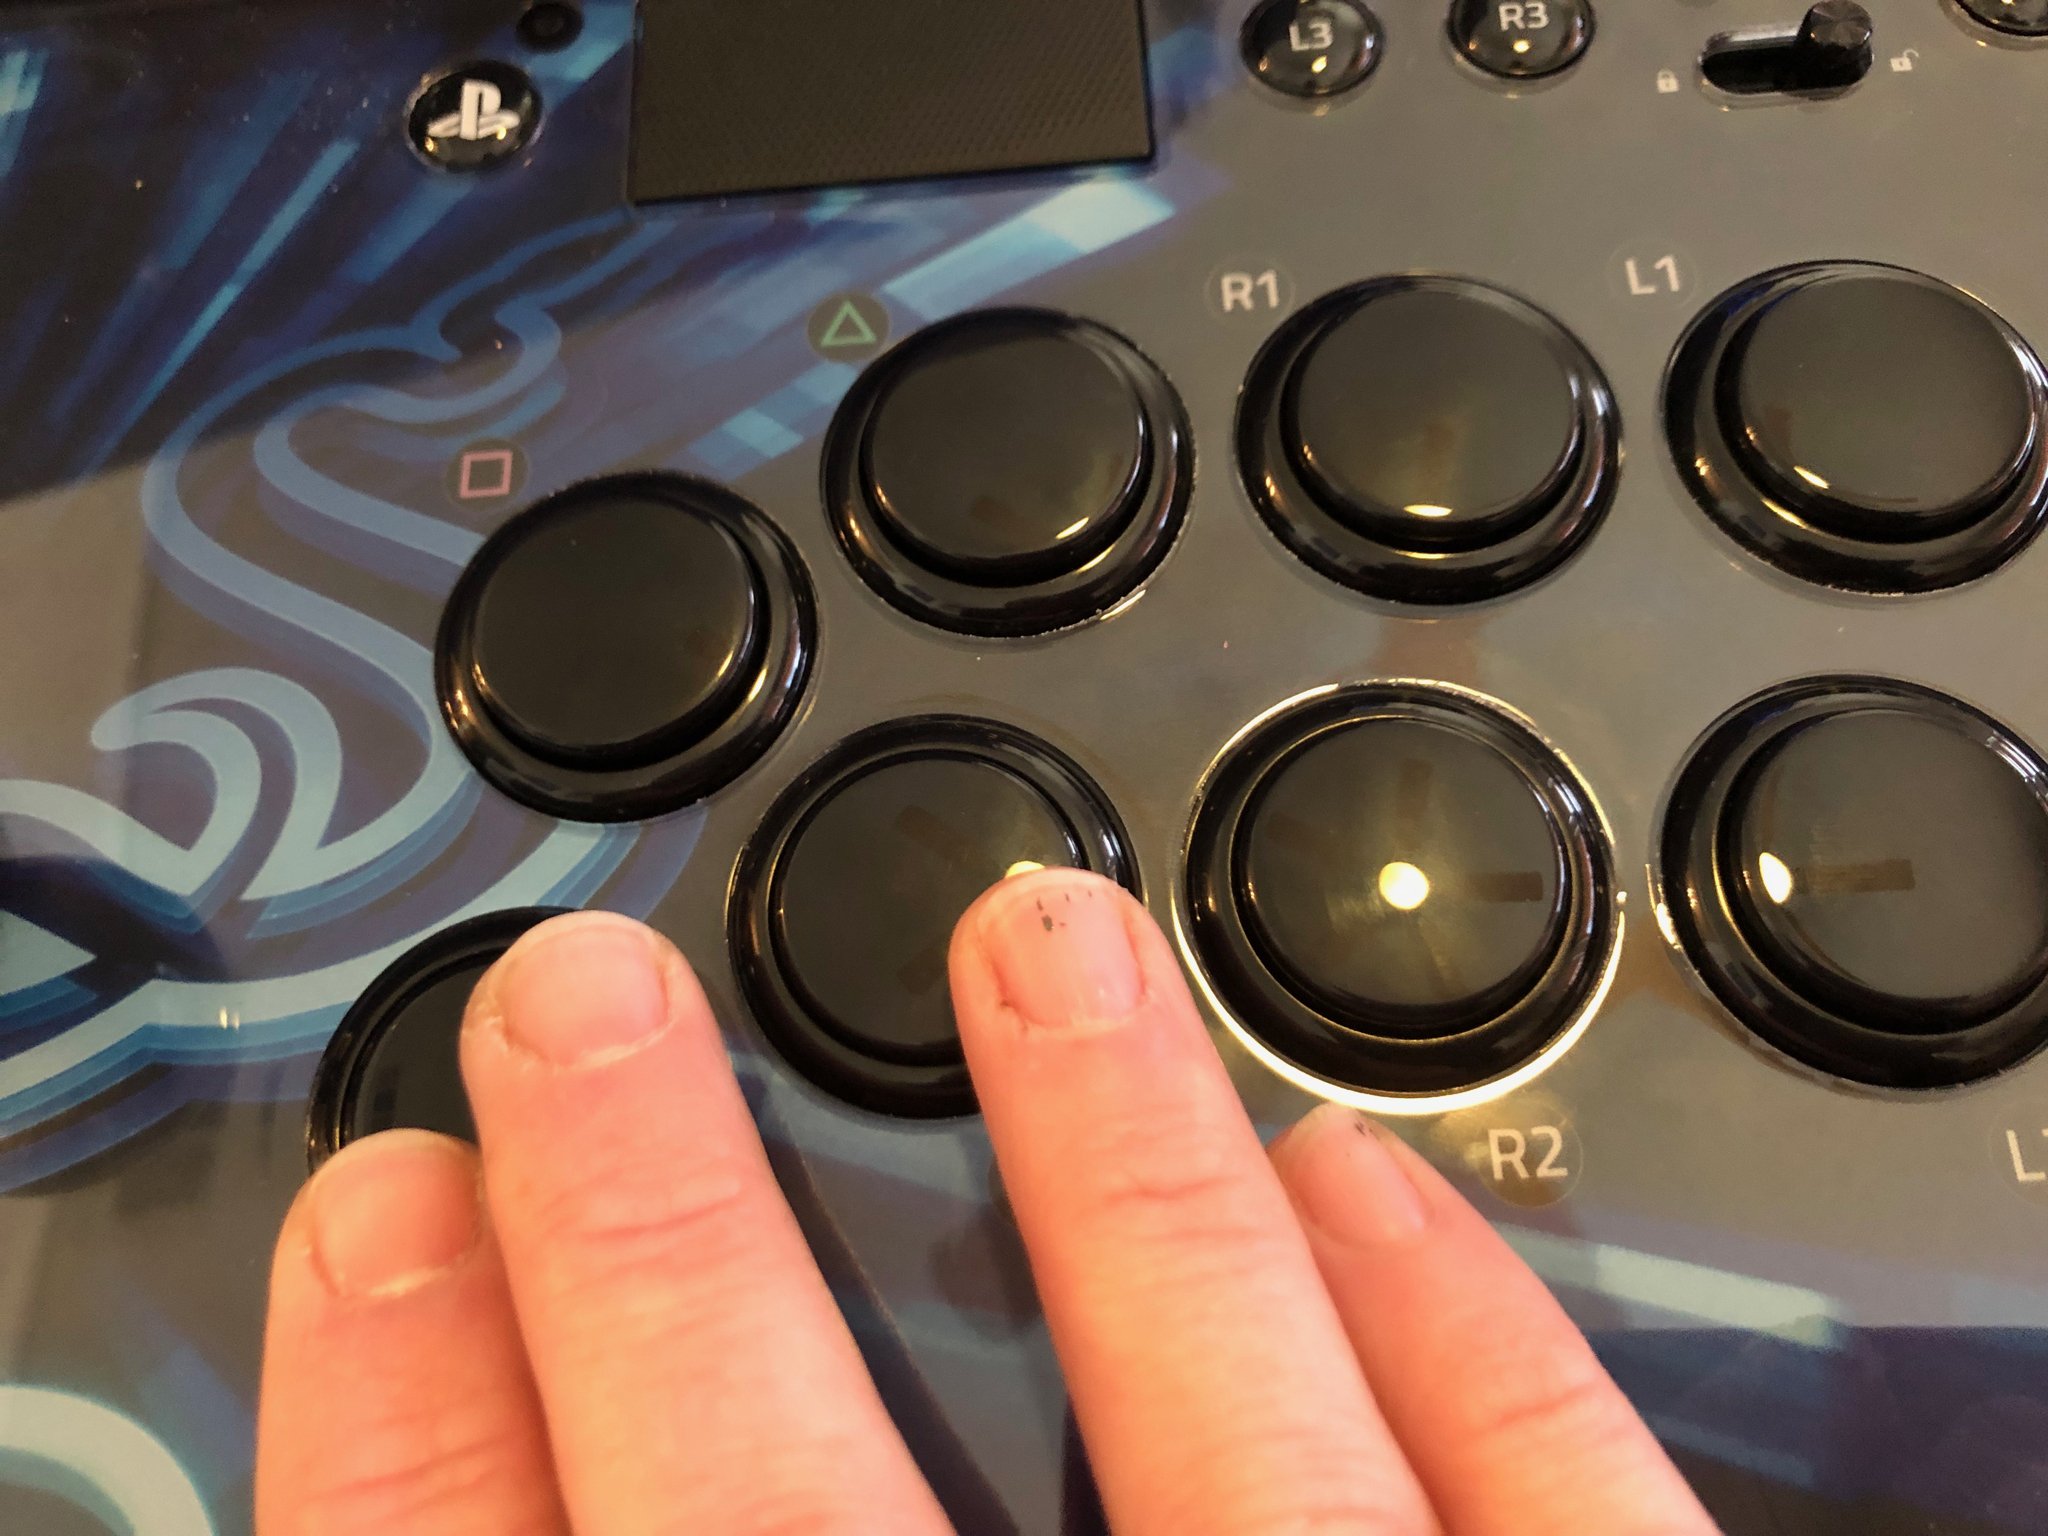 Should you buy a fight stick for Jump Force?